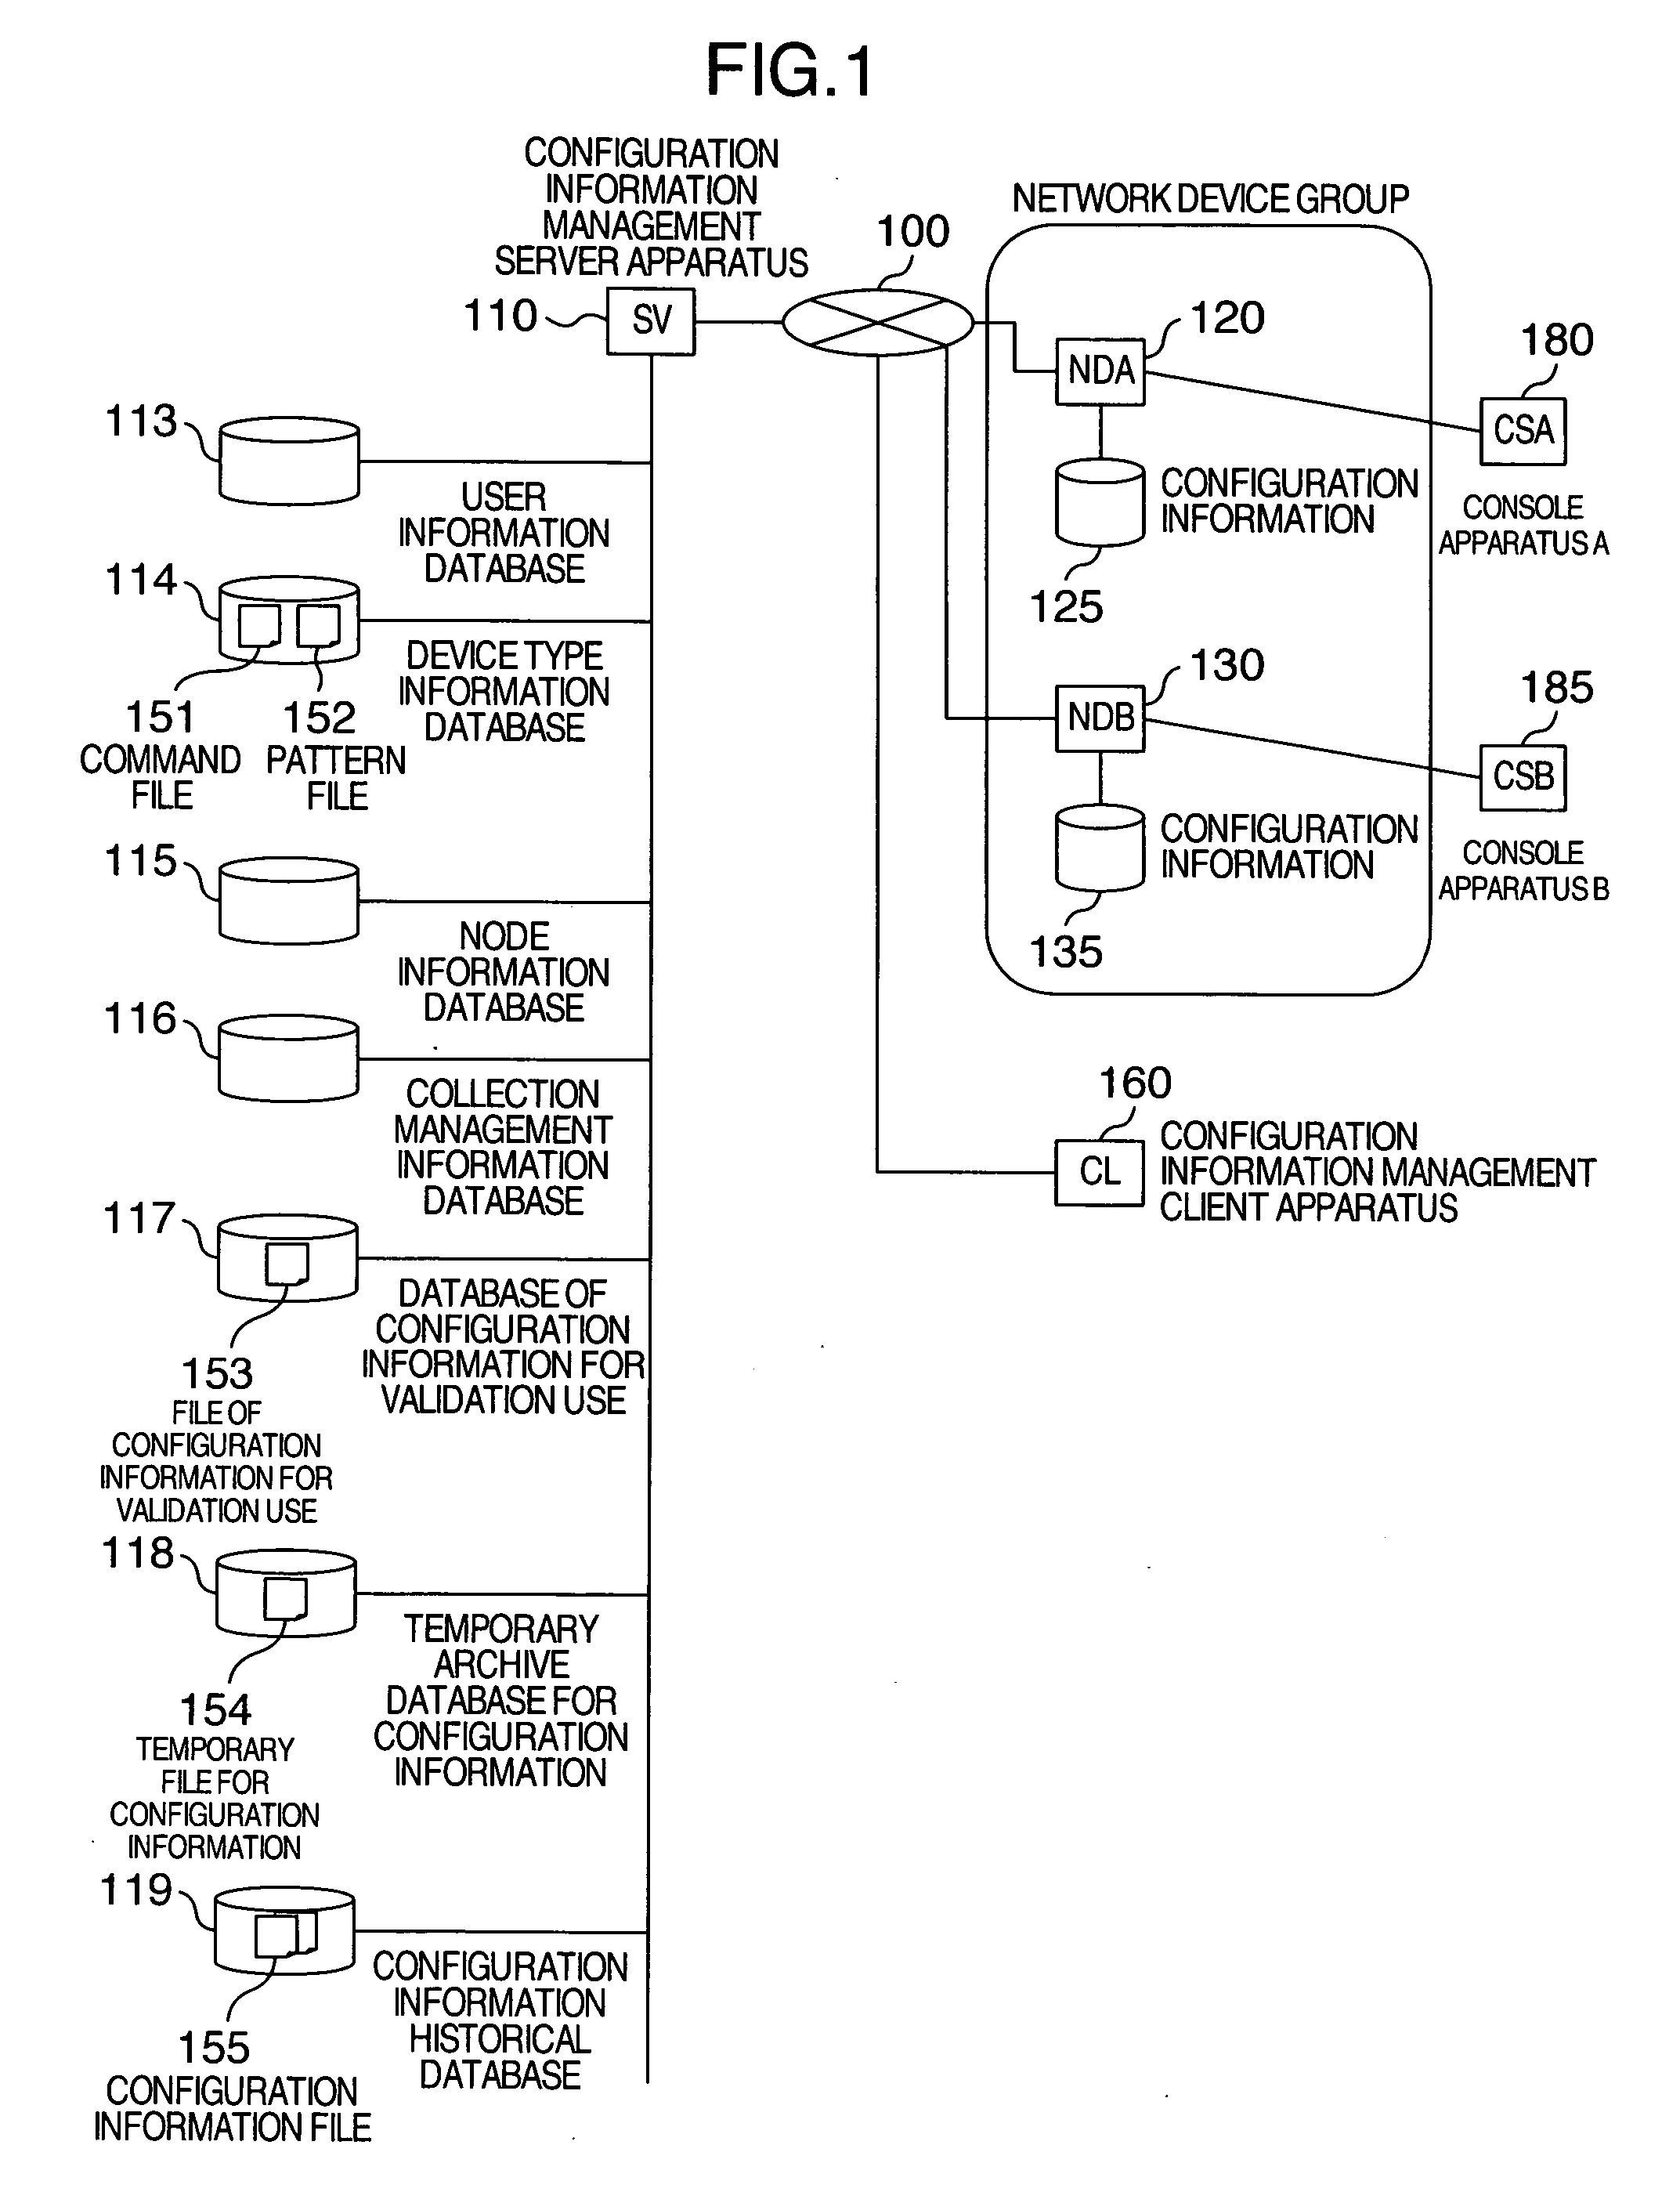 Method and apparatus for managing configuration information, and configuration information managing system using the apparatus